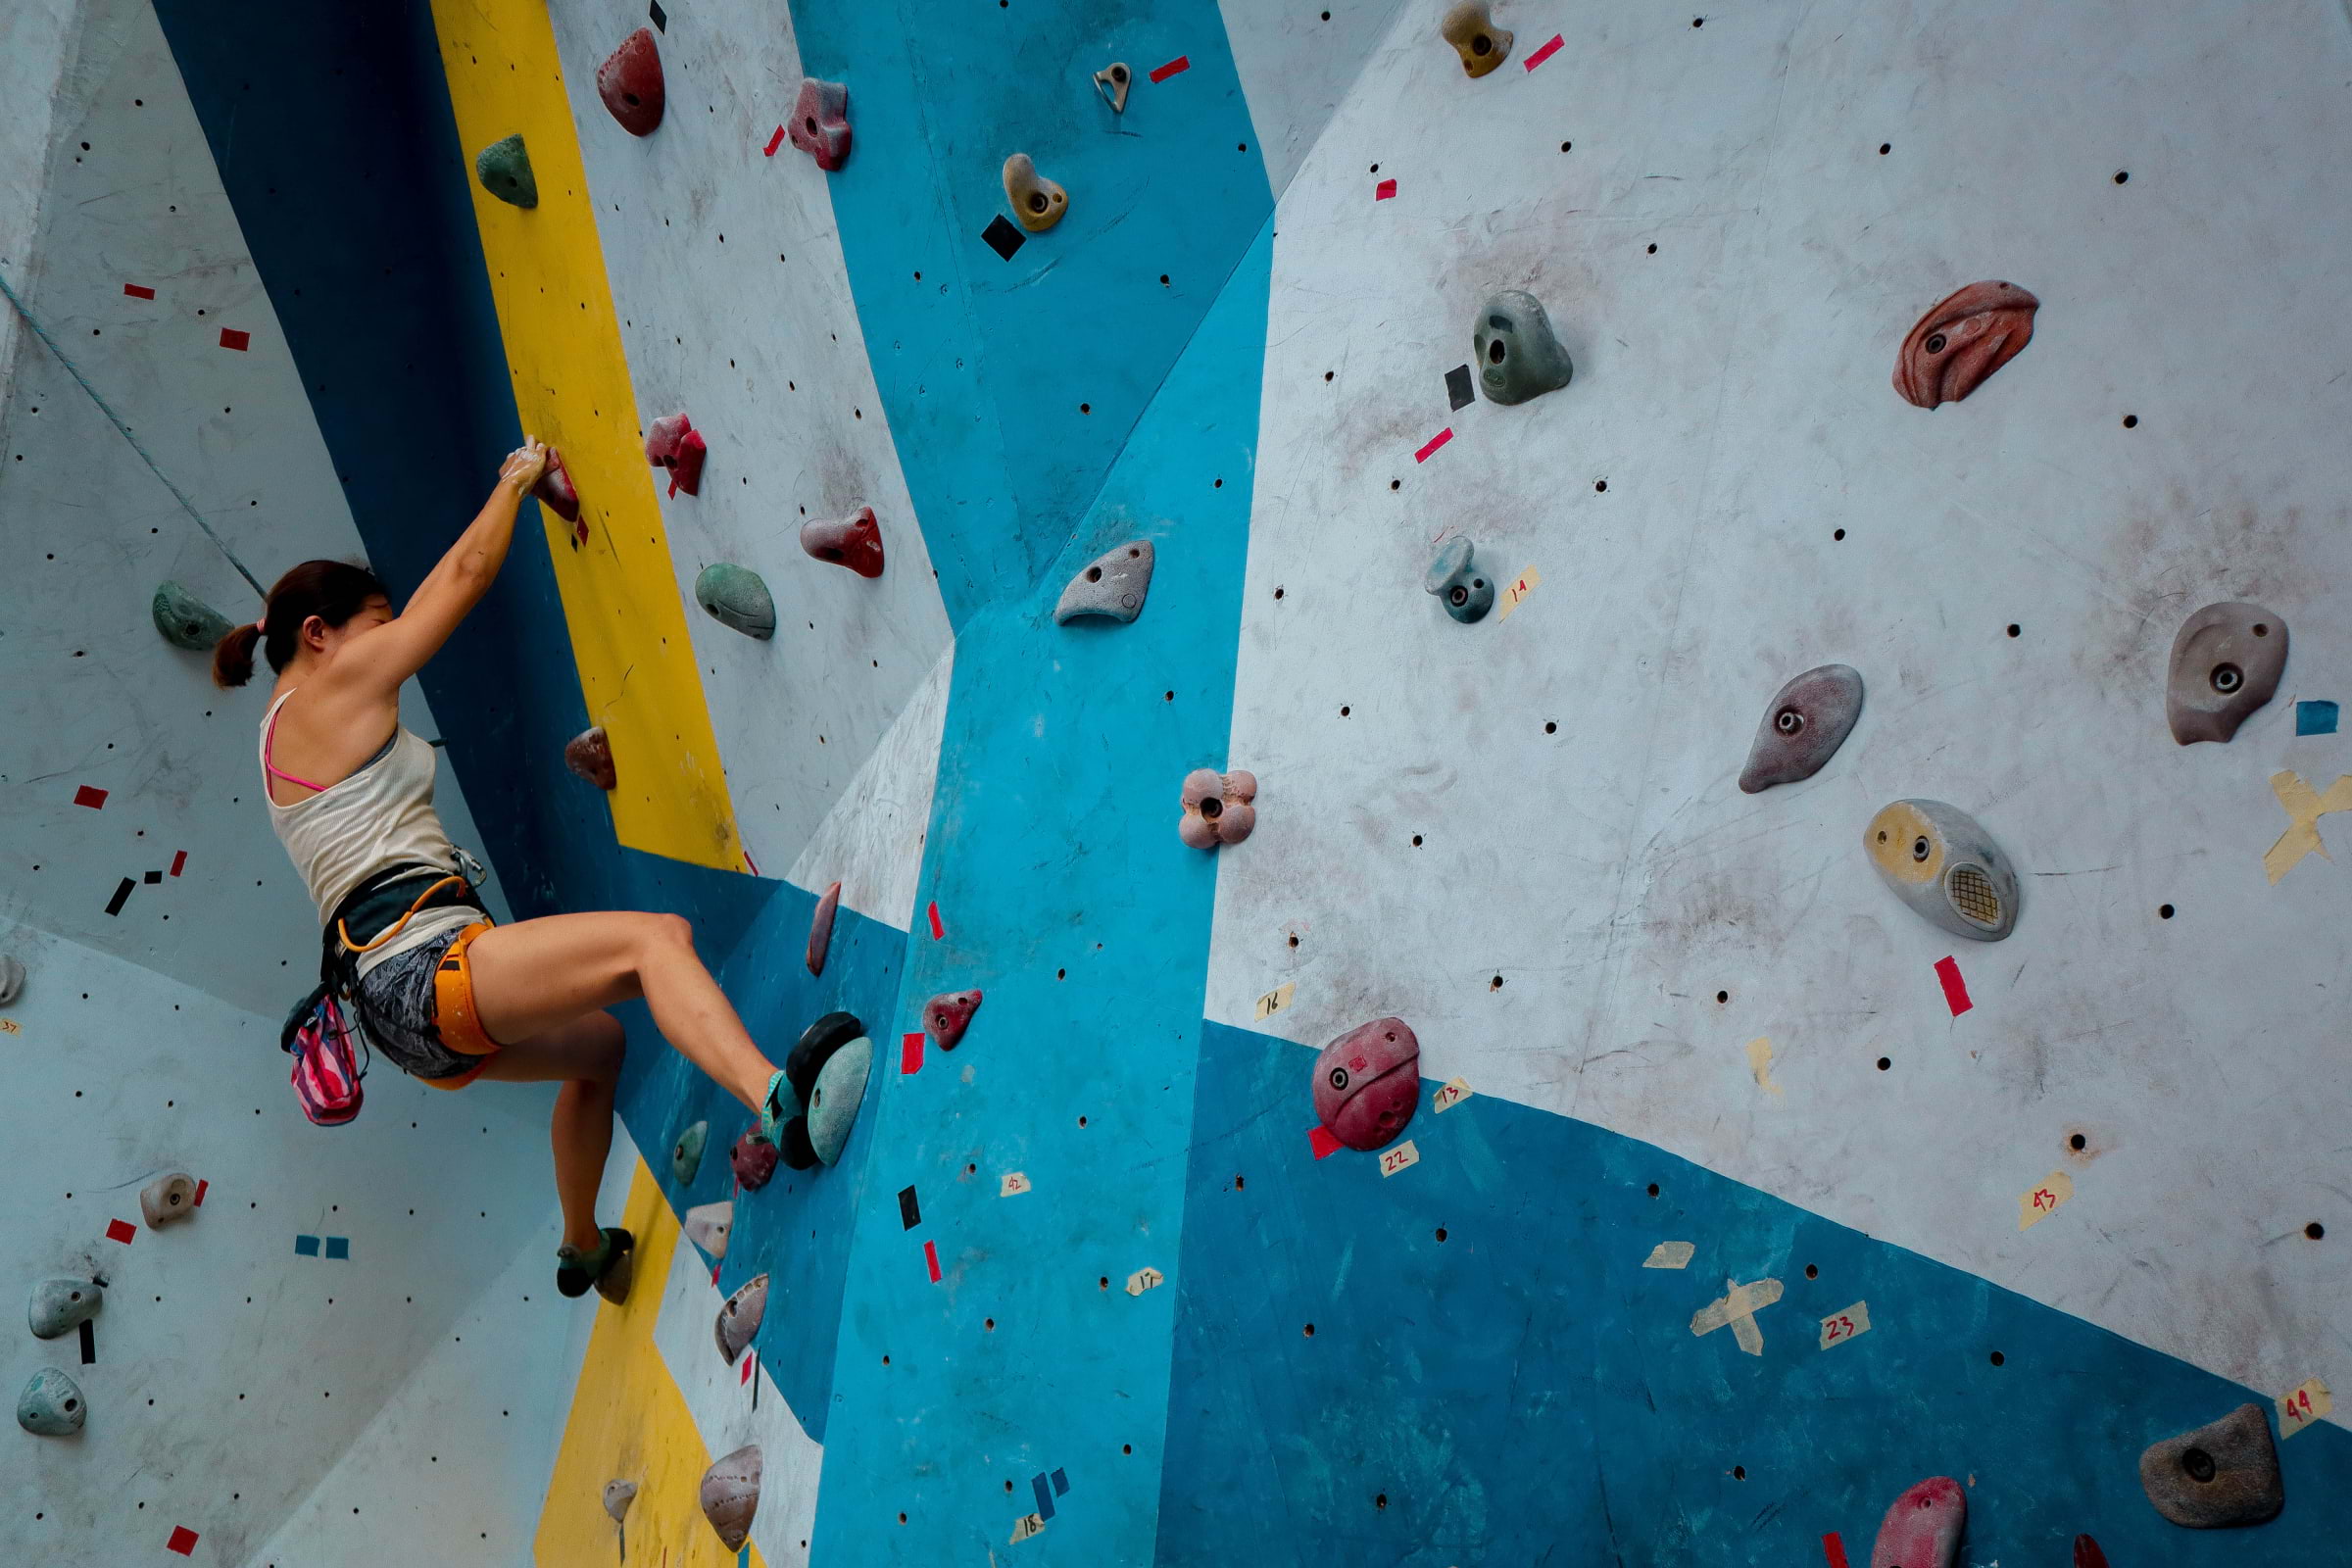 Guide to climbing in London